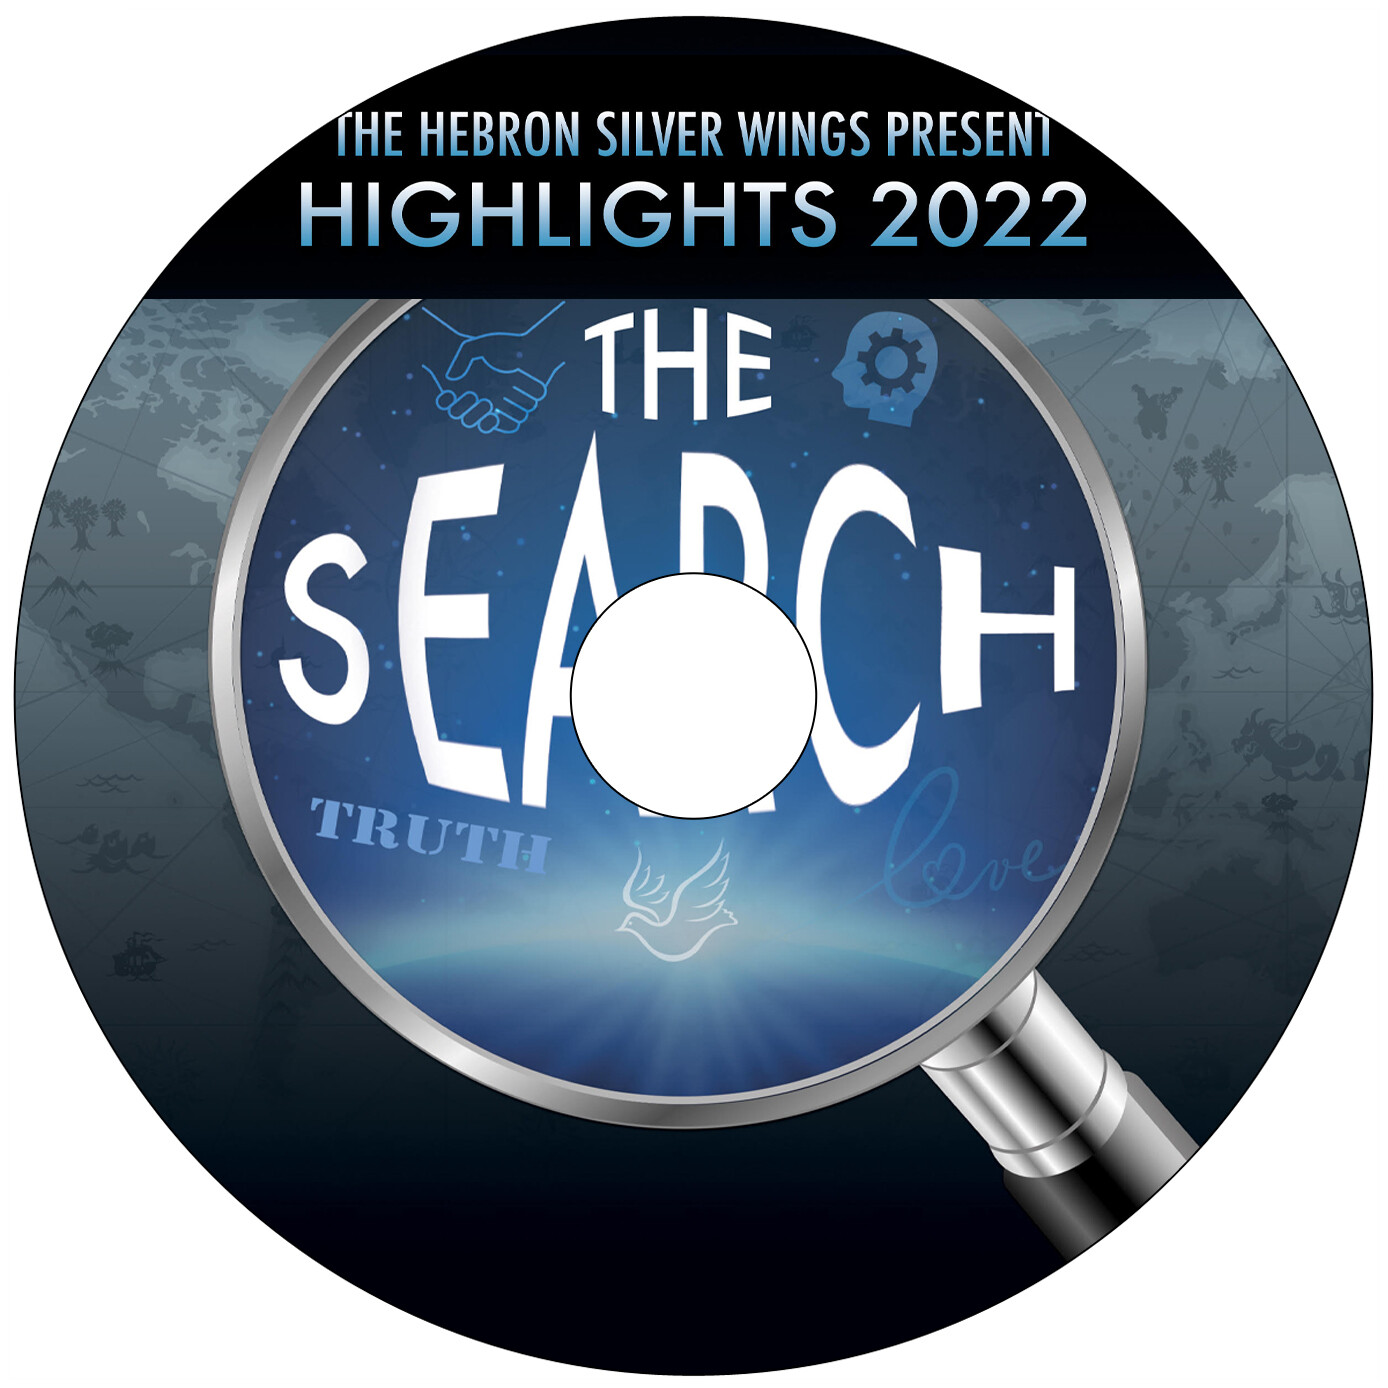 Hebron Silver Wings "The Search" - DVD